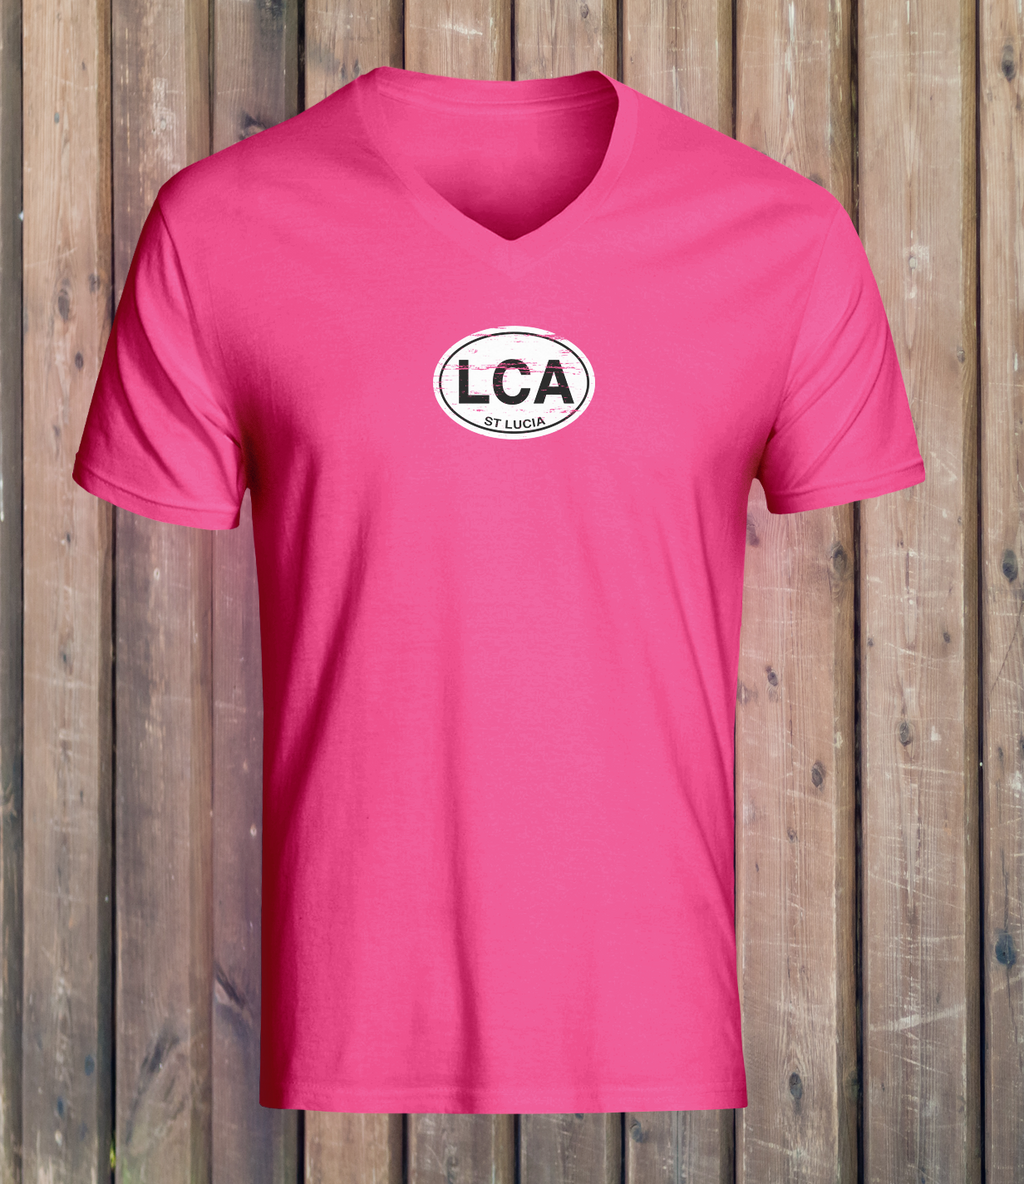 Made In Saint Lucia / St. Lucia T-shirt sold by Cathi Seaweed, SKU 7429986